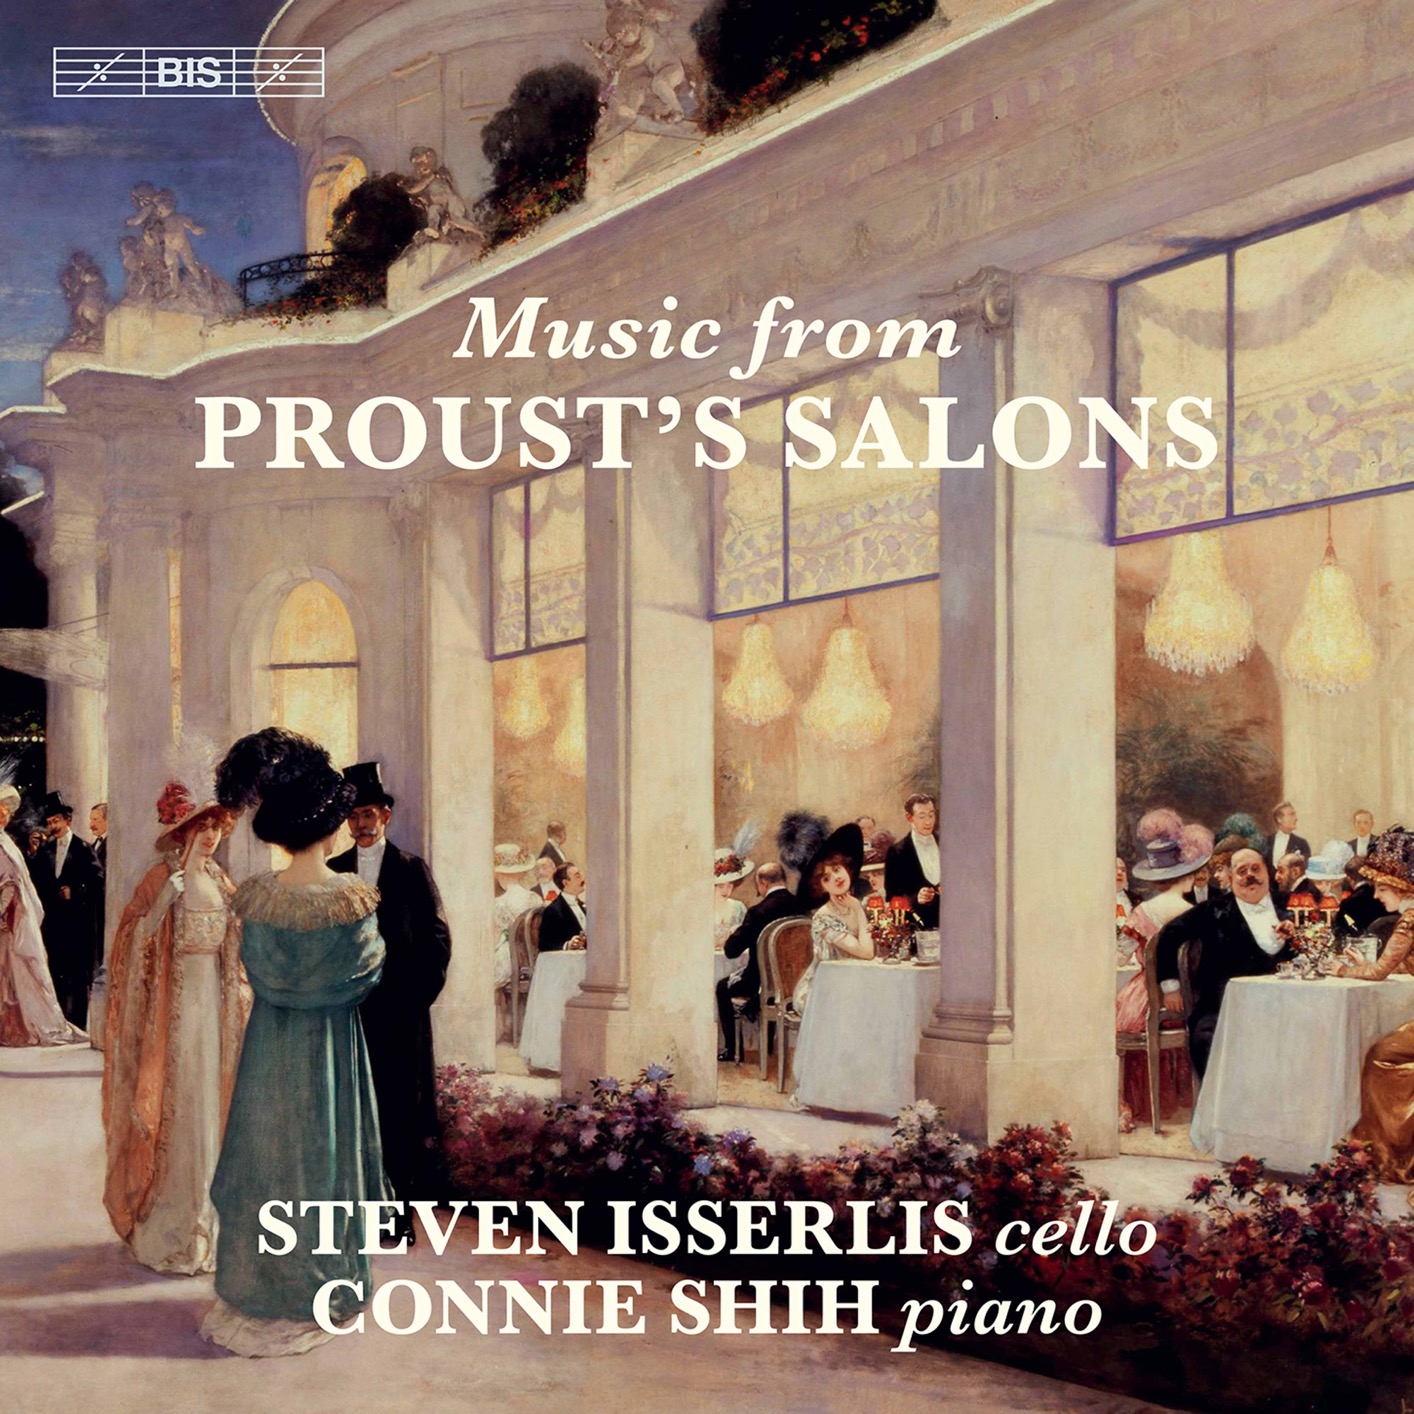 Steven Isserlis & Connie Shih – Cello Music from Proust’s Salons (2021) [FLAC 24bit/96kHz]